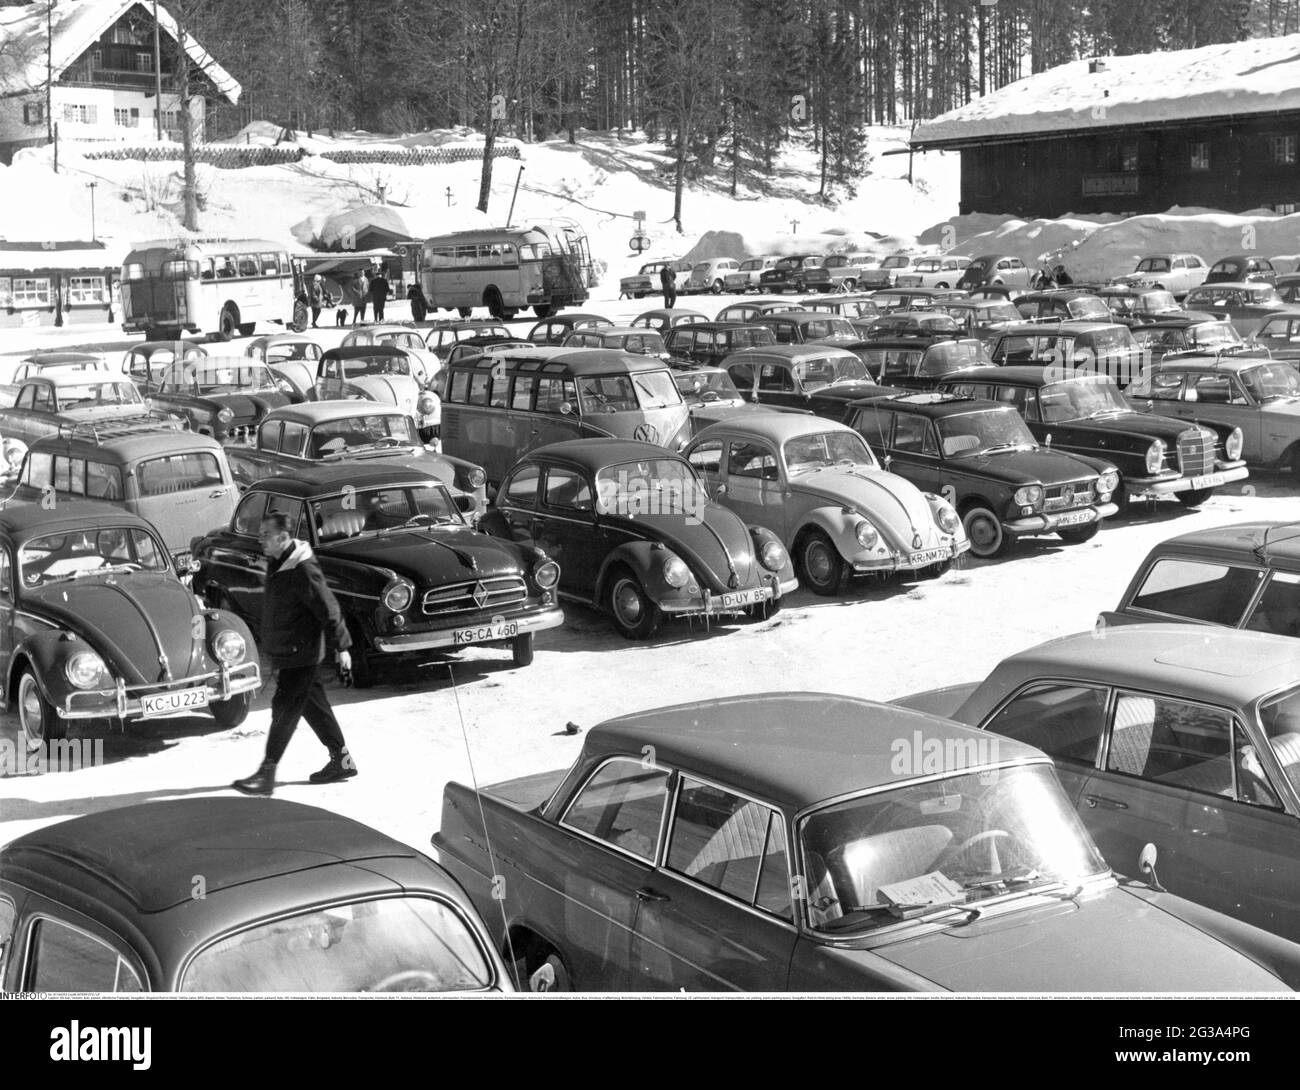 transport / transportation, car, parking, public parking space, Seegatterl, Reit im Winkl skiing area, ADDITIONAL-RIGHTS-CLEARANCE-INFO-NOT-AVAILABLE Stock Photo